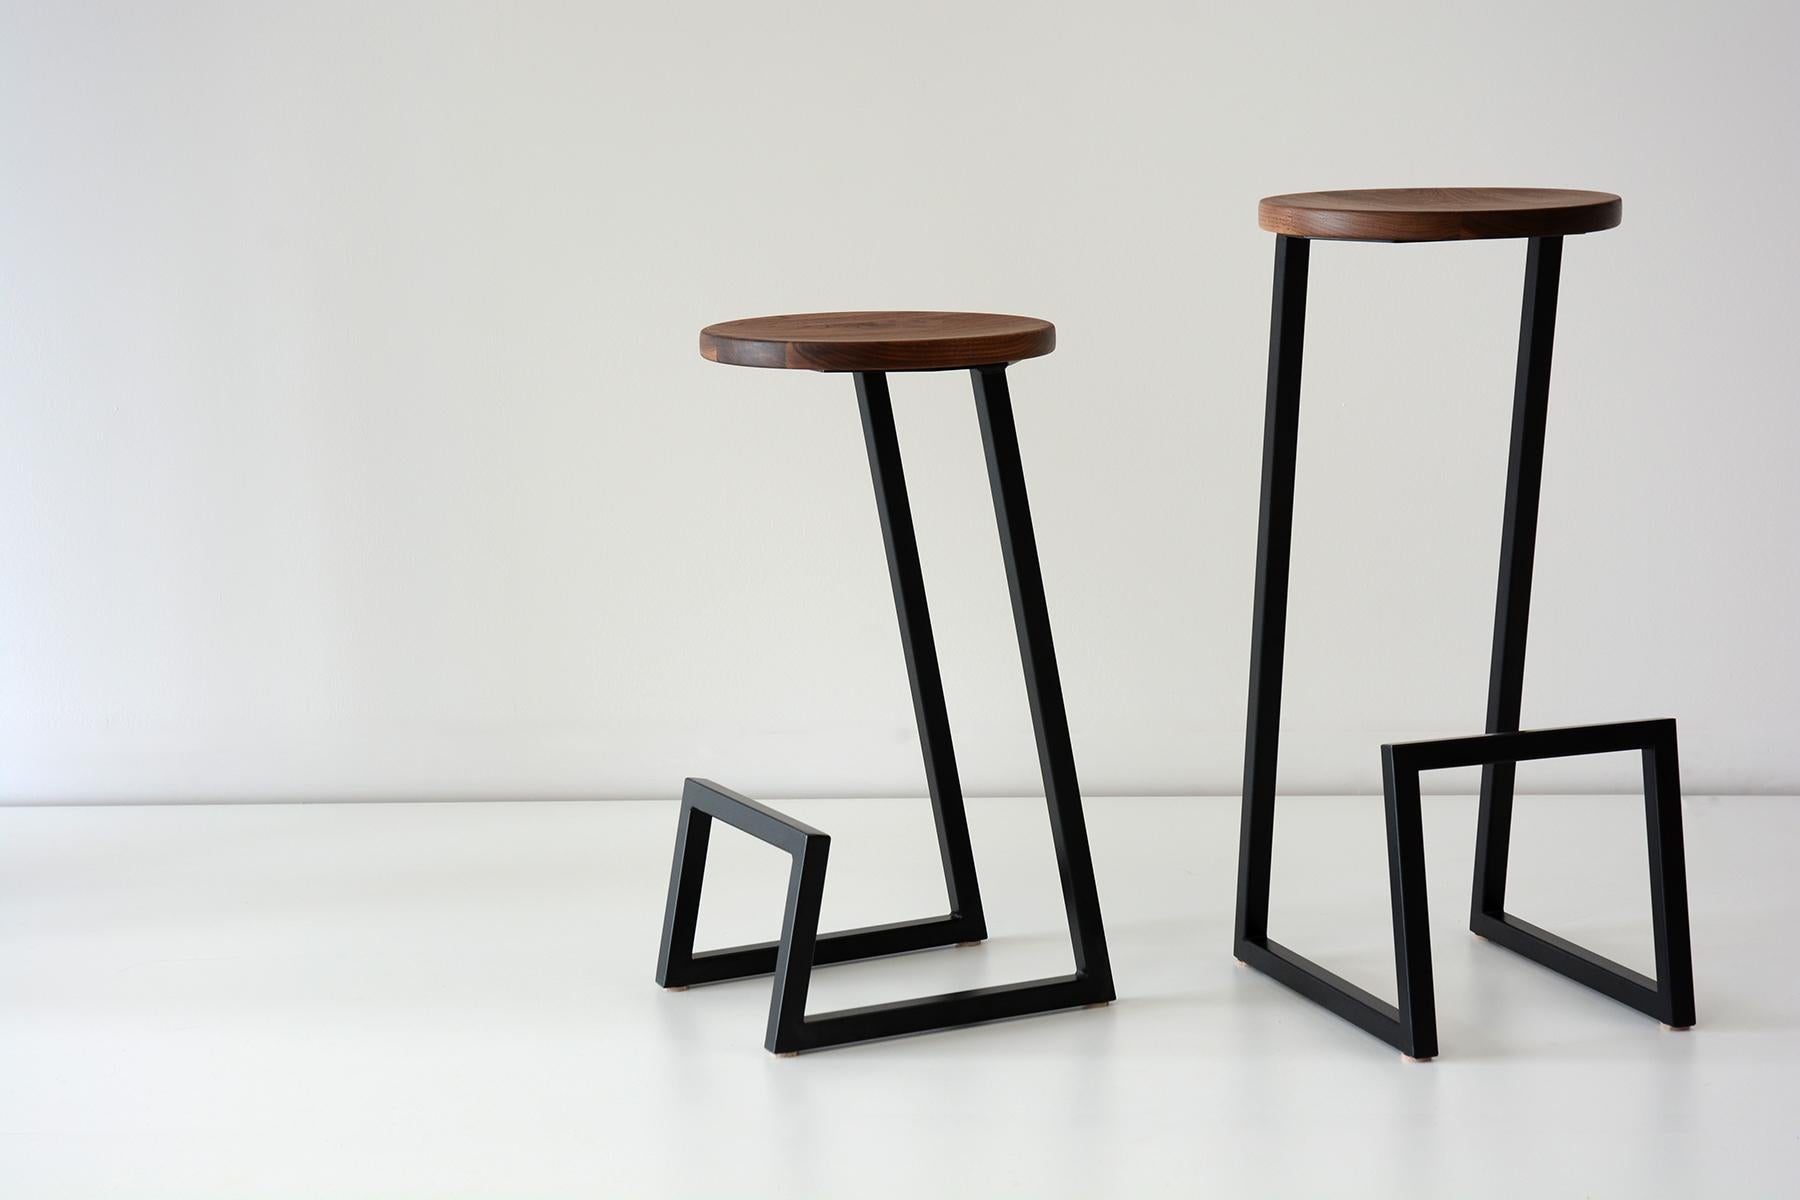 Canadian Upholstered Walnut Corktown Stool Counter by Hollis & Morris